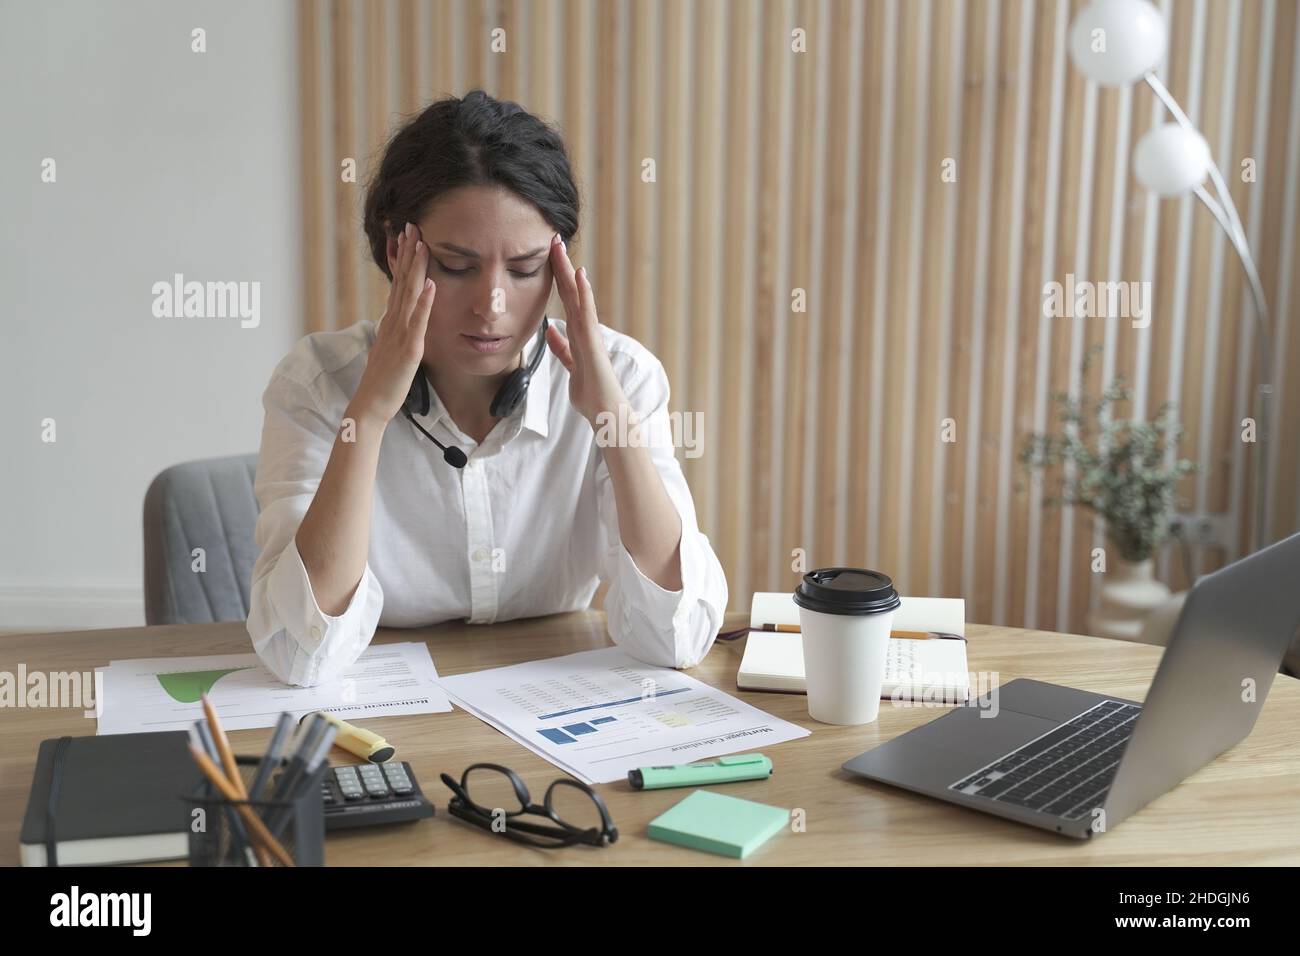 Frustrated upset italian woman holding head in hands suffering from headache after hard working day Stock Photo